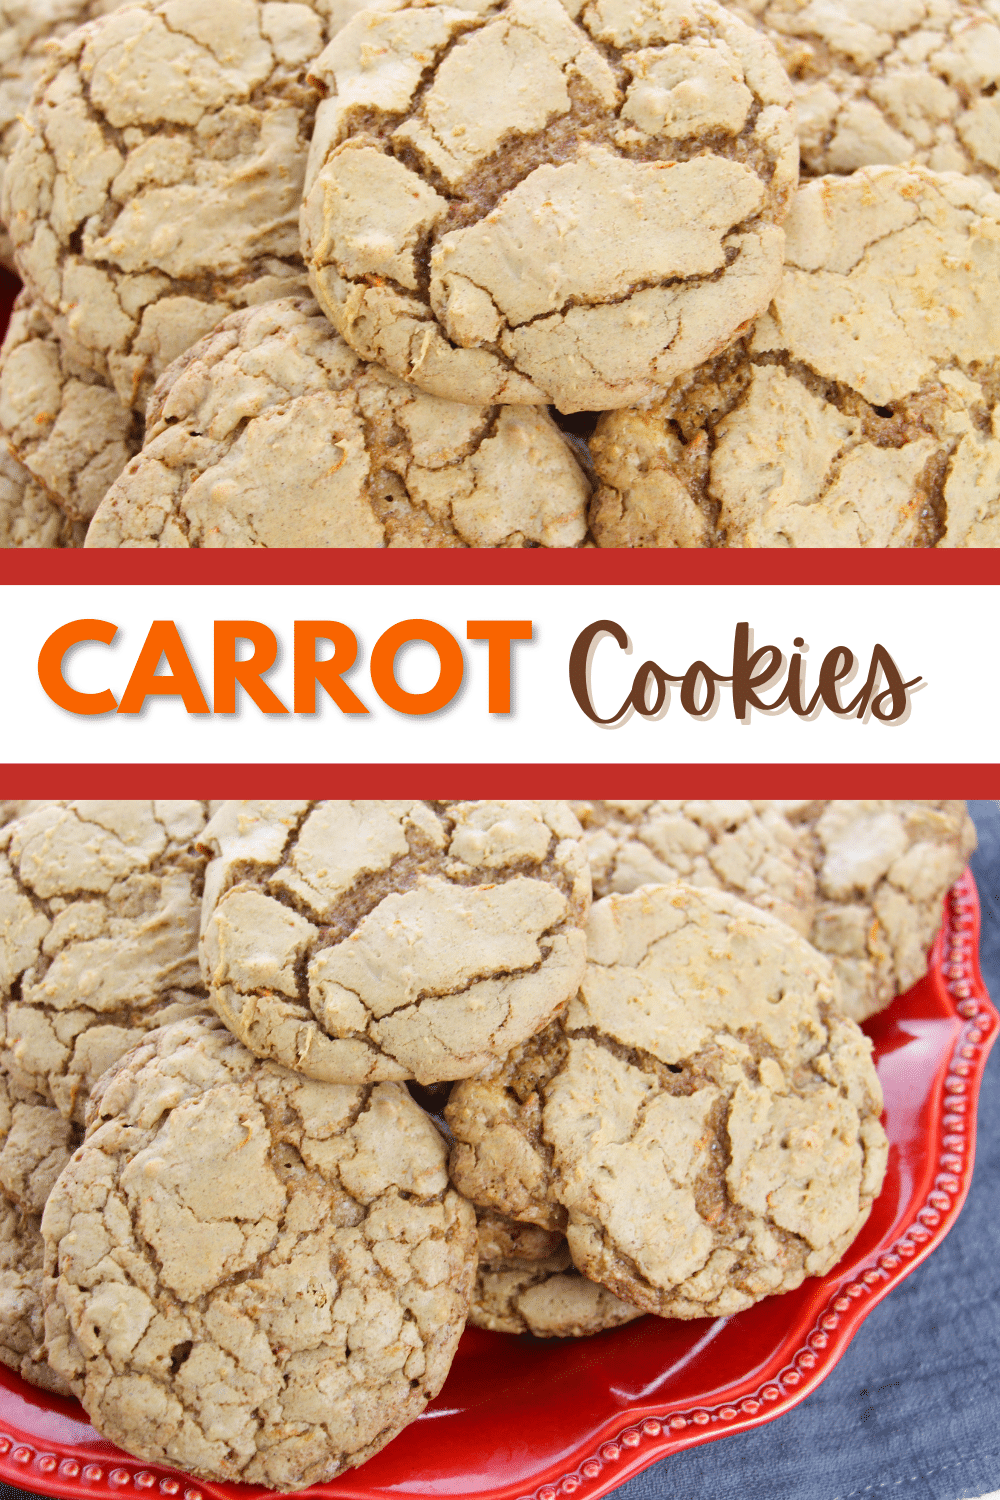 These Carrot Cookies are moist and flavorful, with a hint of cinnamon and nutmeg. They're a great festive treat for Easter. #carrotcookies #easterdessert #carrotcakecookies #cookierecipe #eastercookies via @wondermomwannab